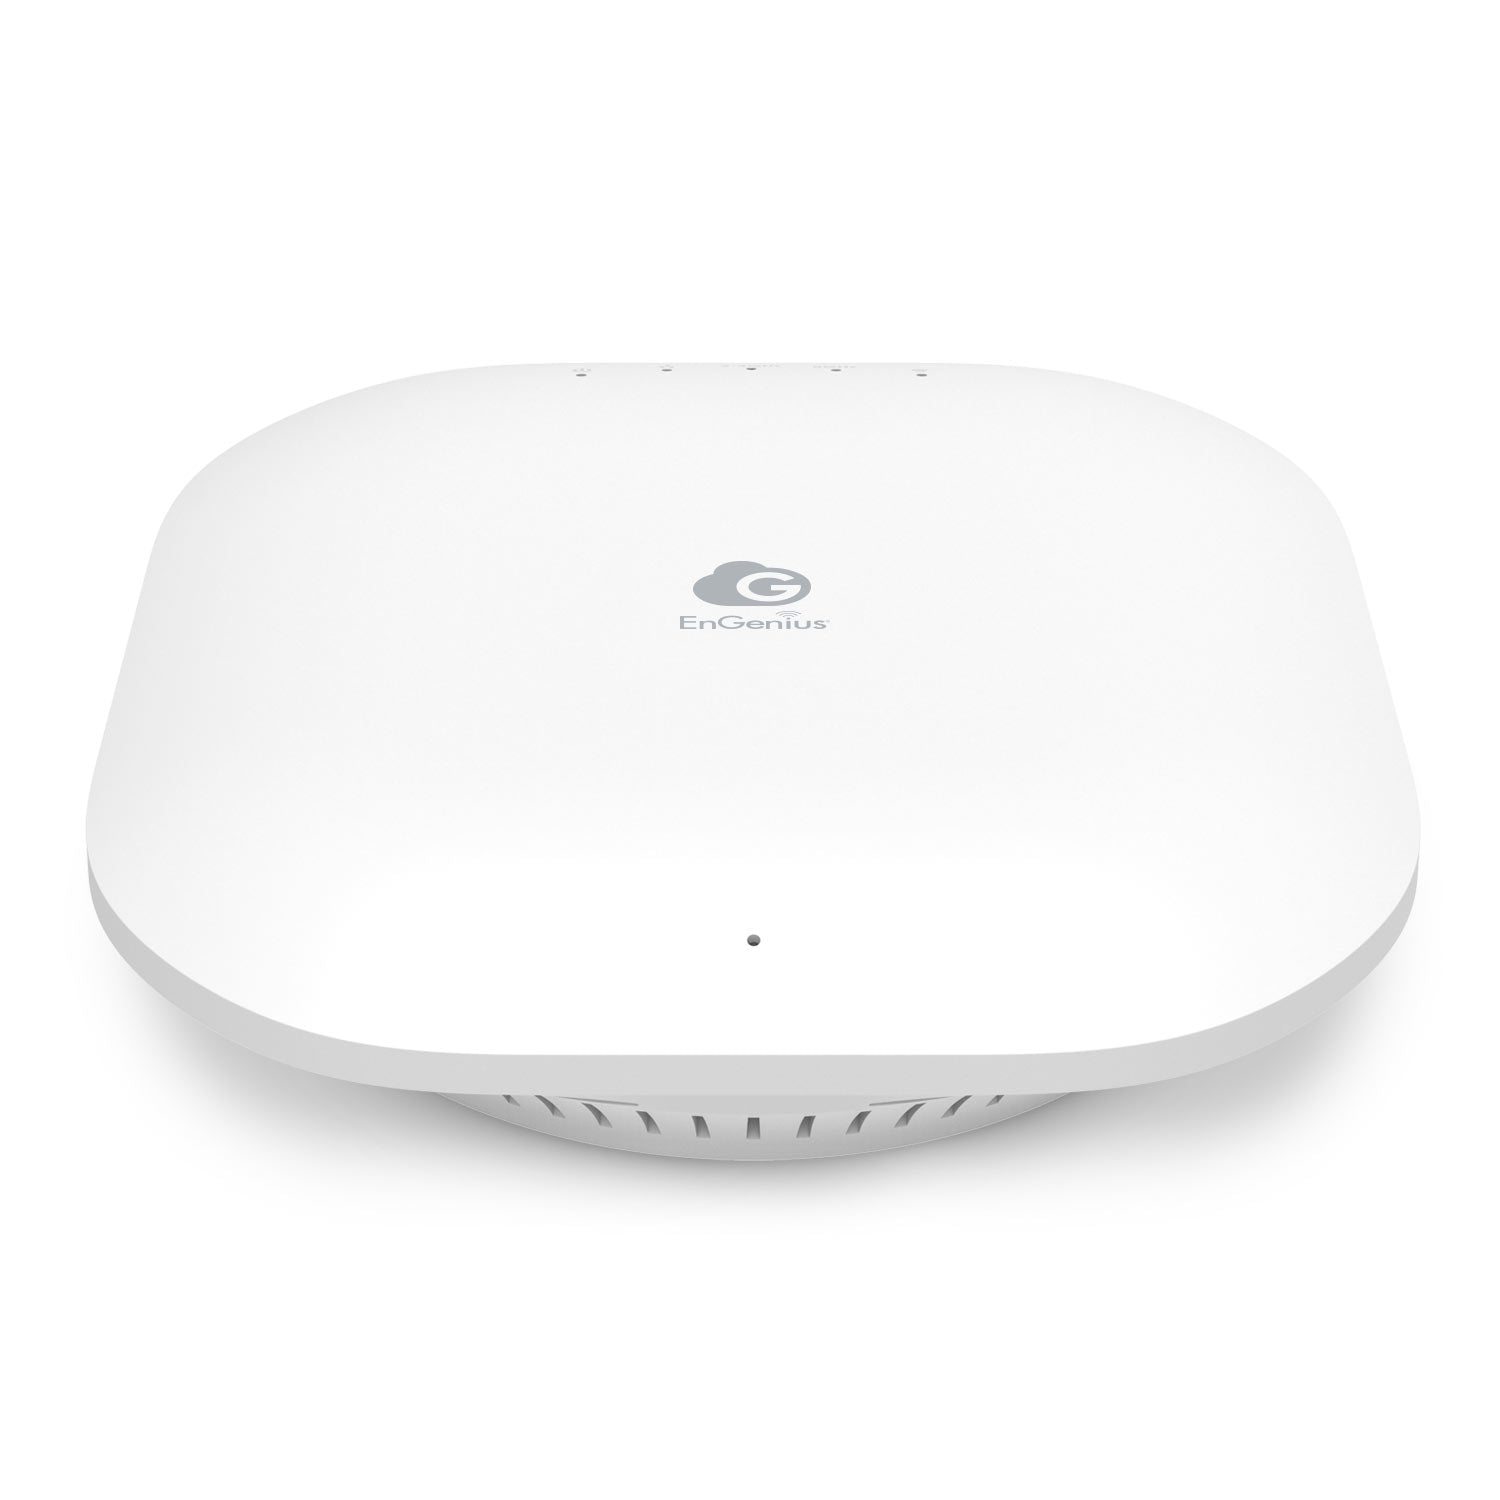 ECW120: Cloud Managed 11ac Wave 2 Indoor Wireless Access Point